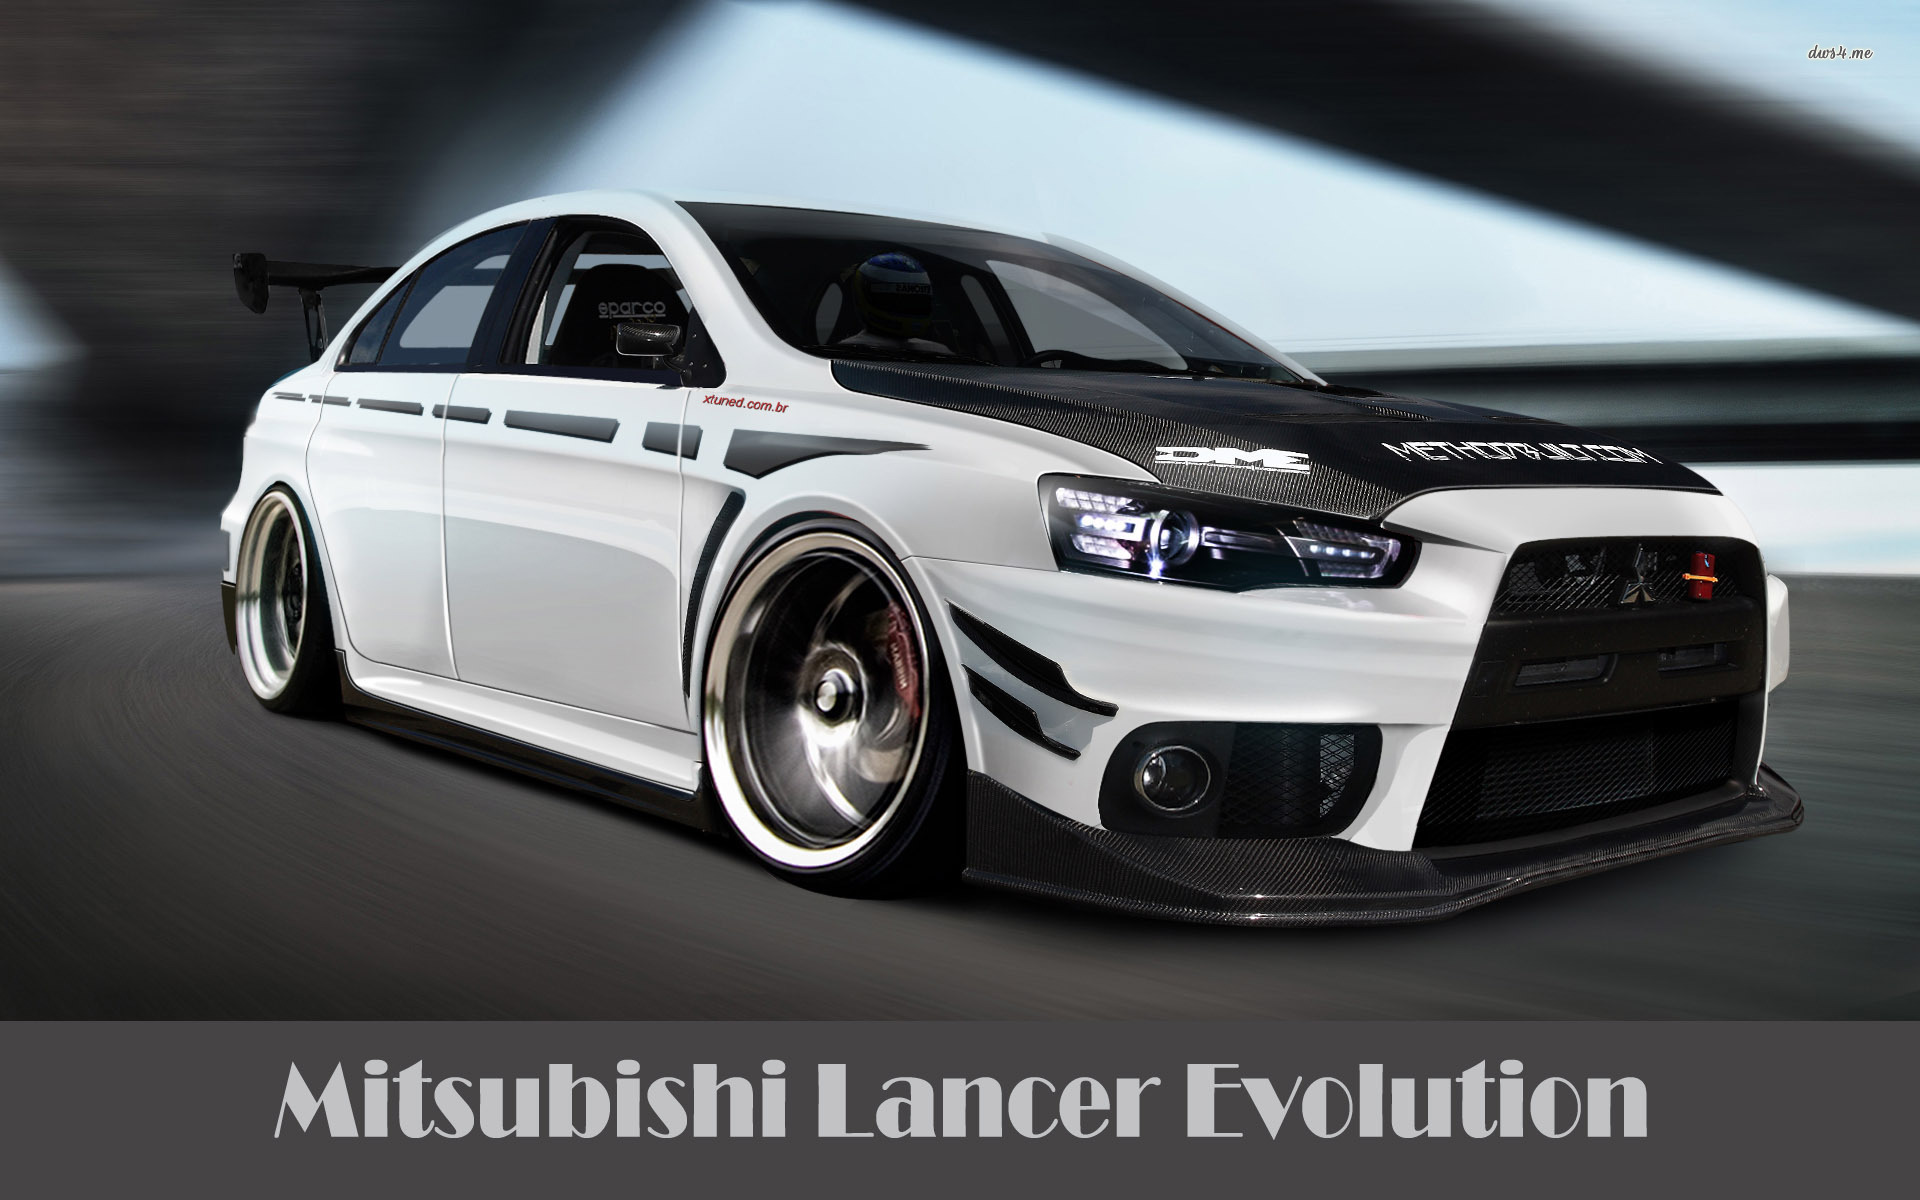 mitsubishi lancer | In HD Wallpaper Home Design and Cars HD ...